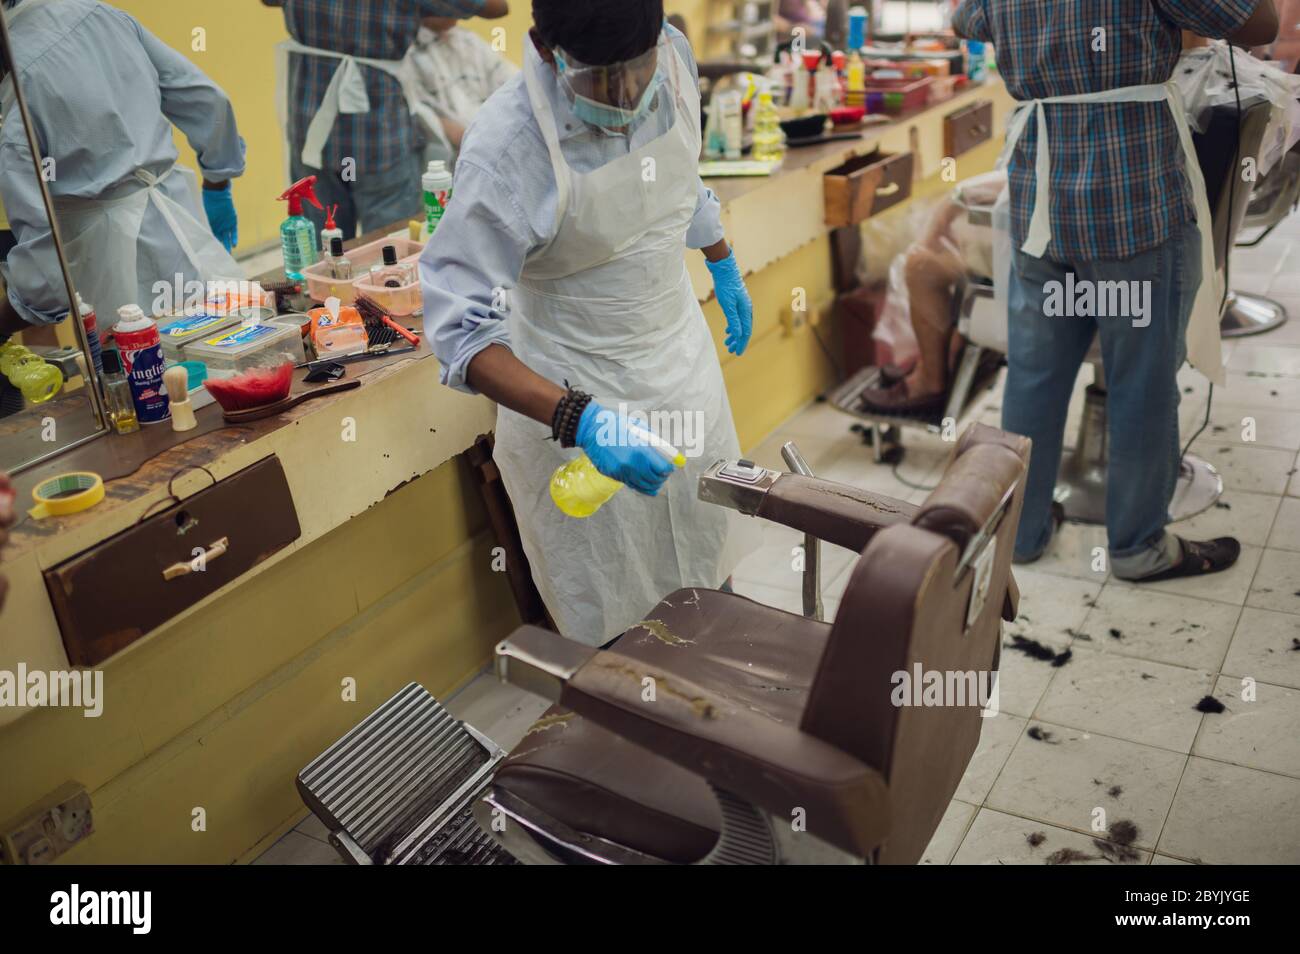 Kuala Lumpur, Malaysia. 10th June, 2020. A barber sprays disinfectant to a seat at a barbershop in Kuala Lumpur, Malaysia, June 10, 2020. TO GO WITH 'Feature: Malaysians brave adventure in barbershops as COVID-19 restrictions ease' Credit: Zhu Wei/Xinhua/Alamy Live News Stock Photo